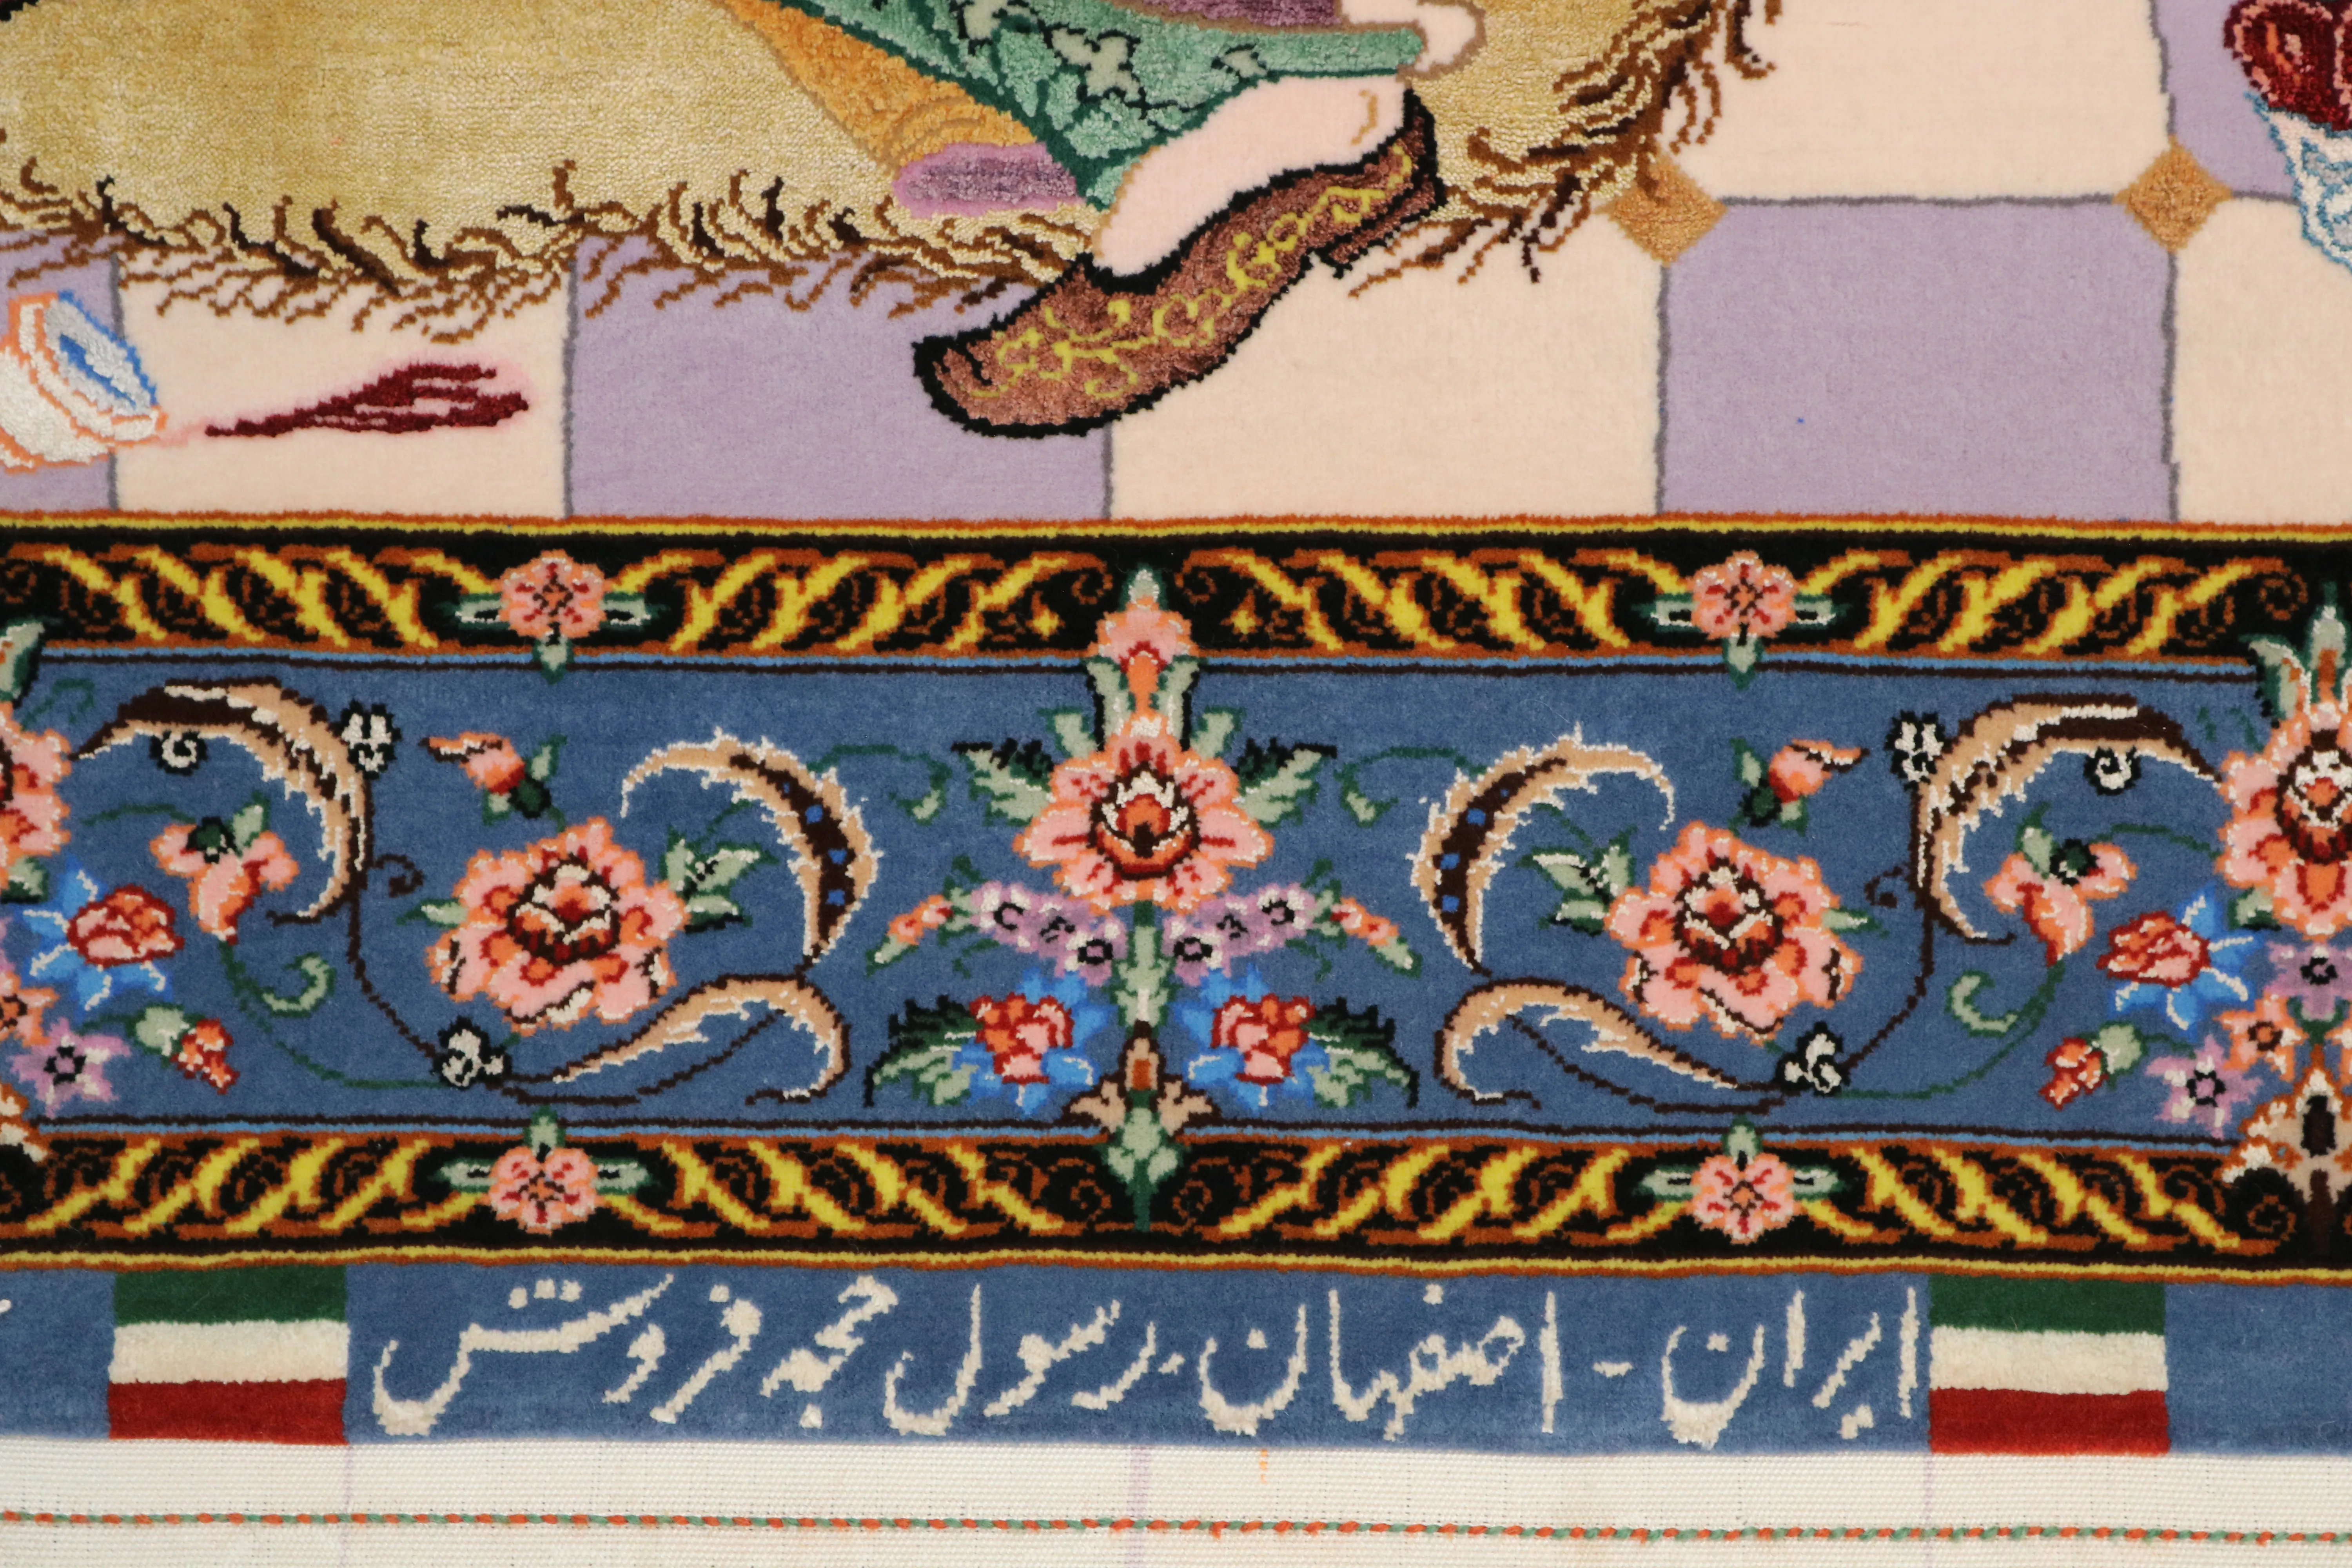 Handcrafted Pictorial Wool and Silk Carpet from Isfahan